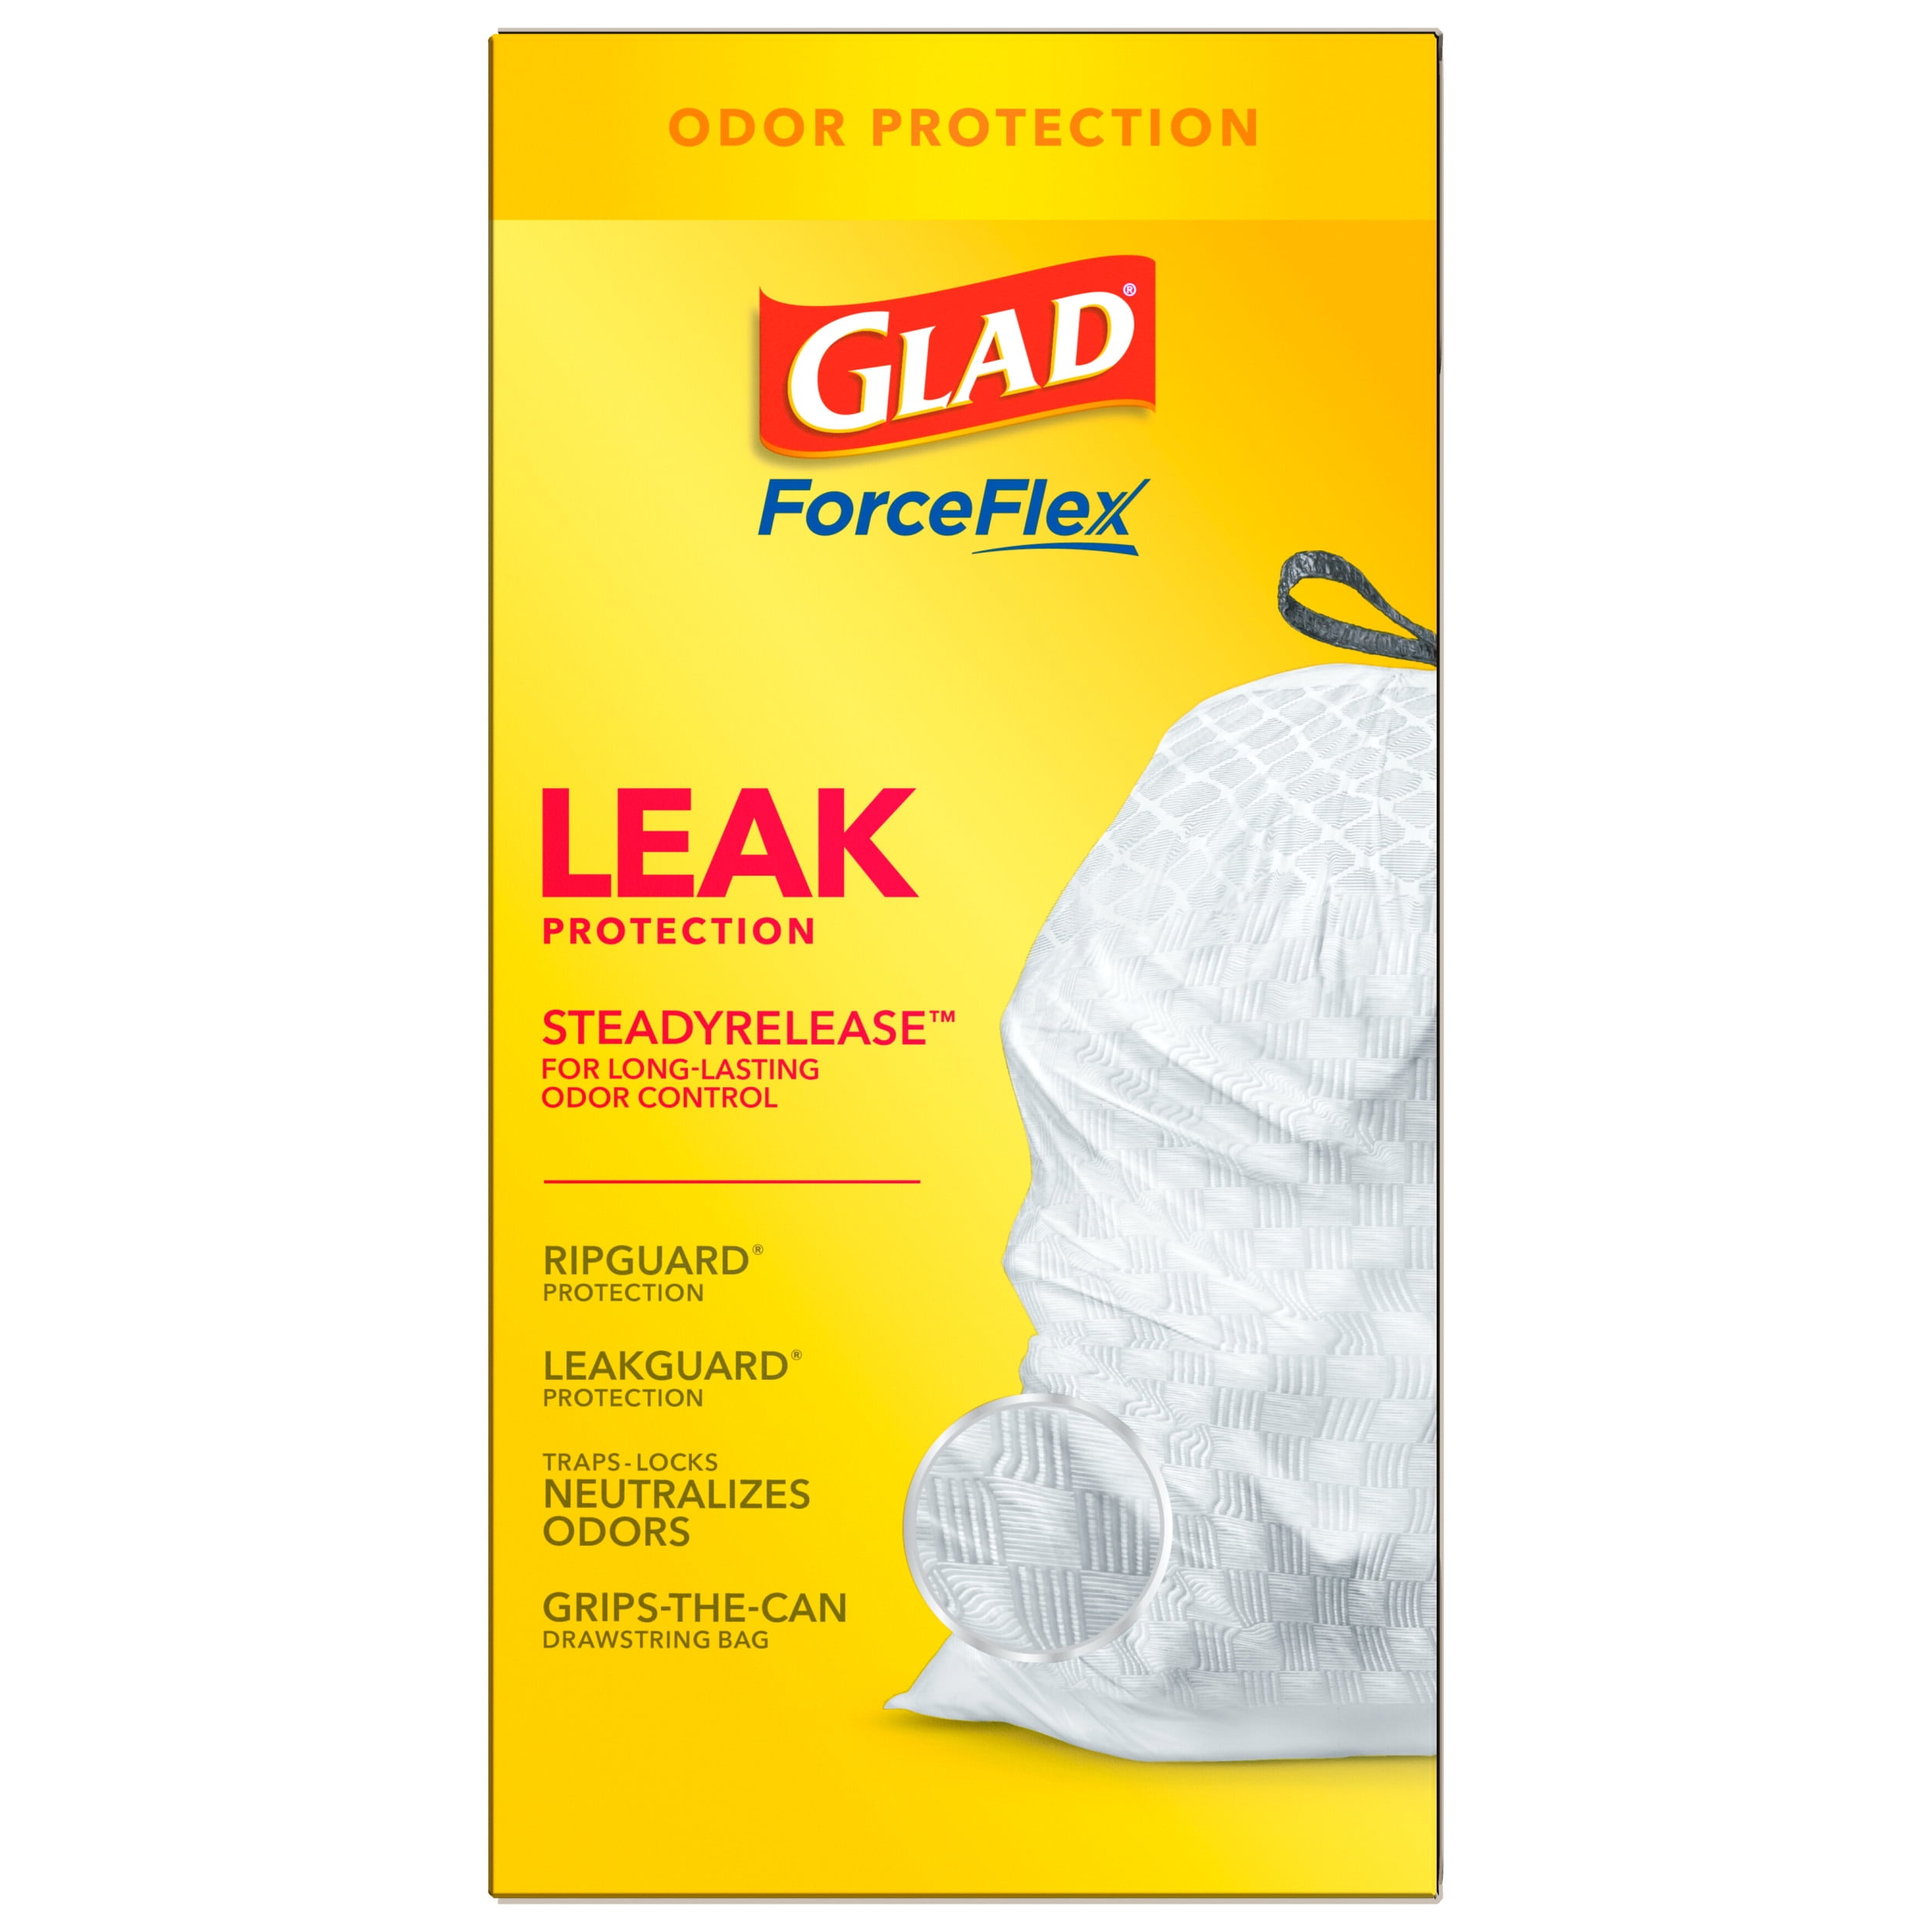  Glad Tall Kitchen Quick-Tie Trash Bags, OdorShield 13 Gallon  White Trash Bag, Gain Moonlight Breeze with Febreze Freshness, 40 Count :  Health & Household